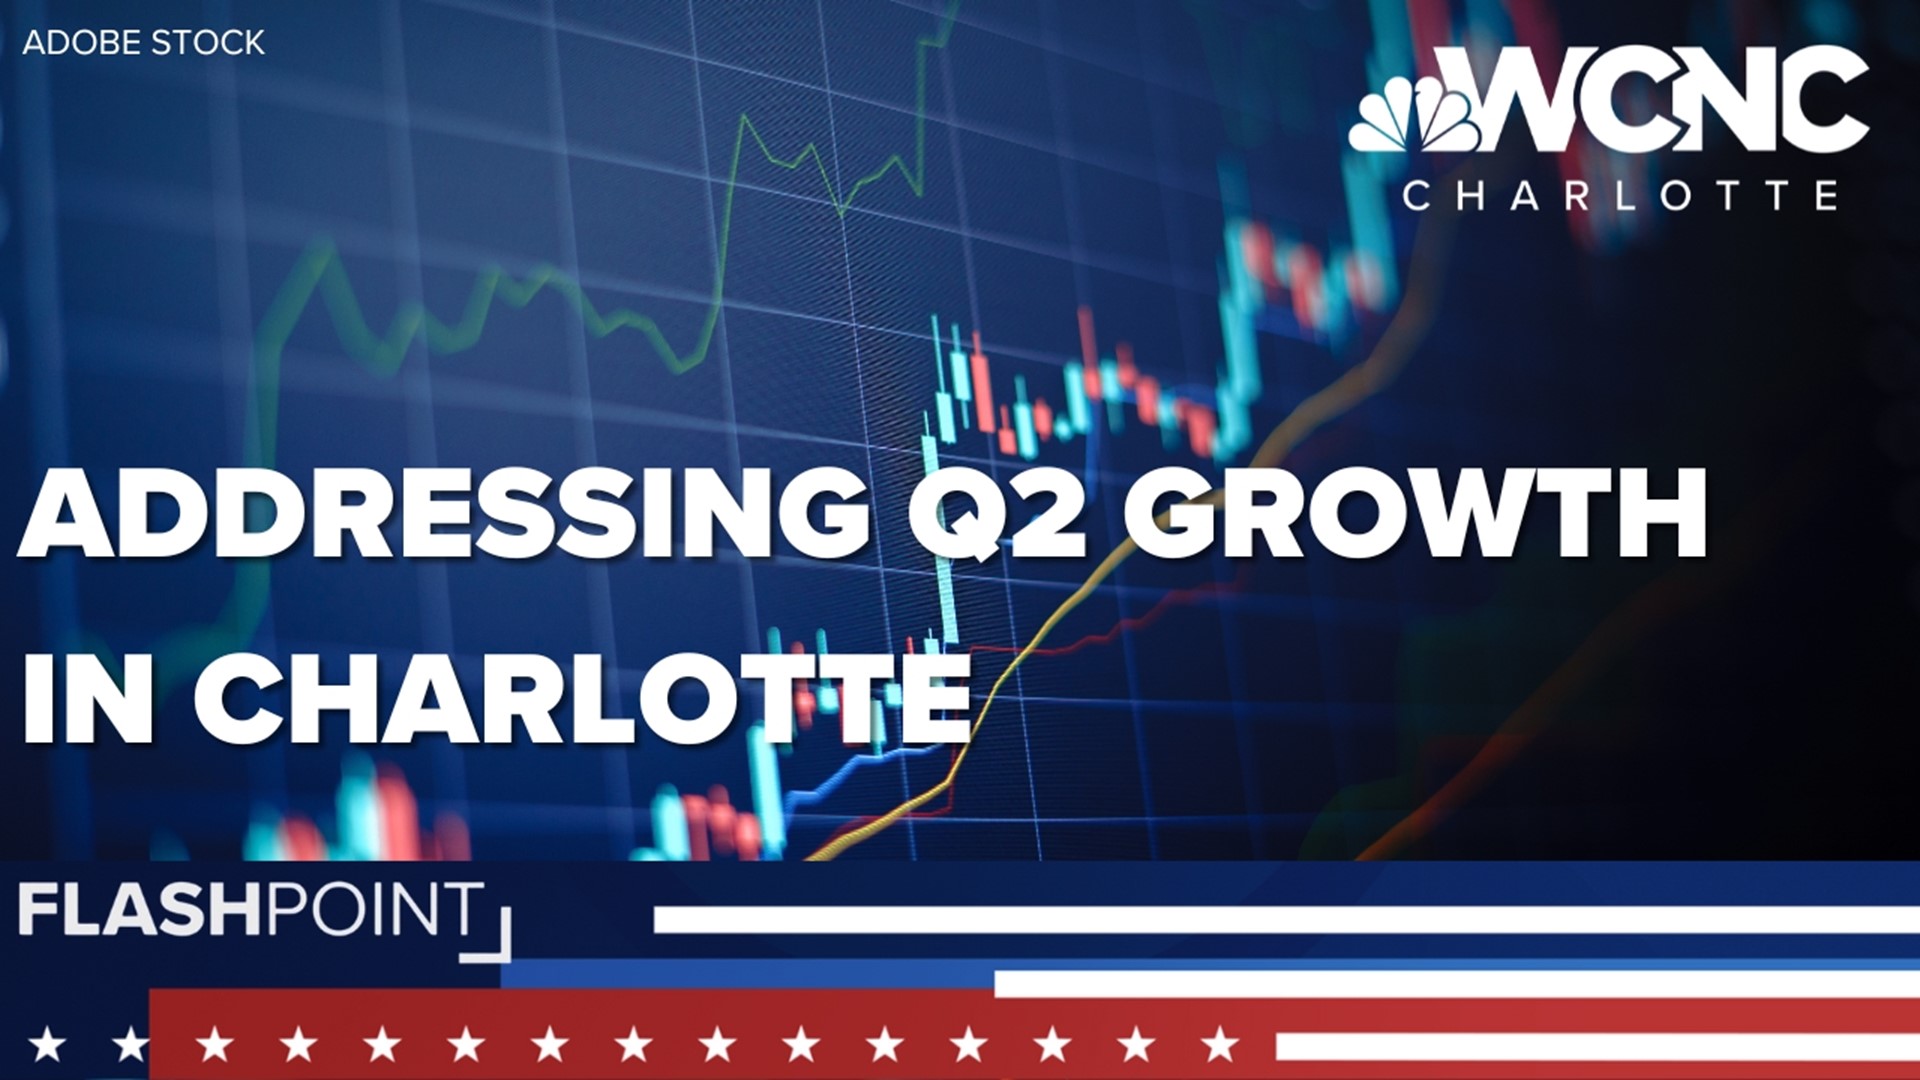 On Flashpoint, Ben talks to Kelly O'Brien, the Chief Advocacy and Strategy Officer for the Charlotte Regional Business Alliance about the alliance’s Q2 Growth Report